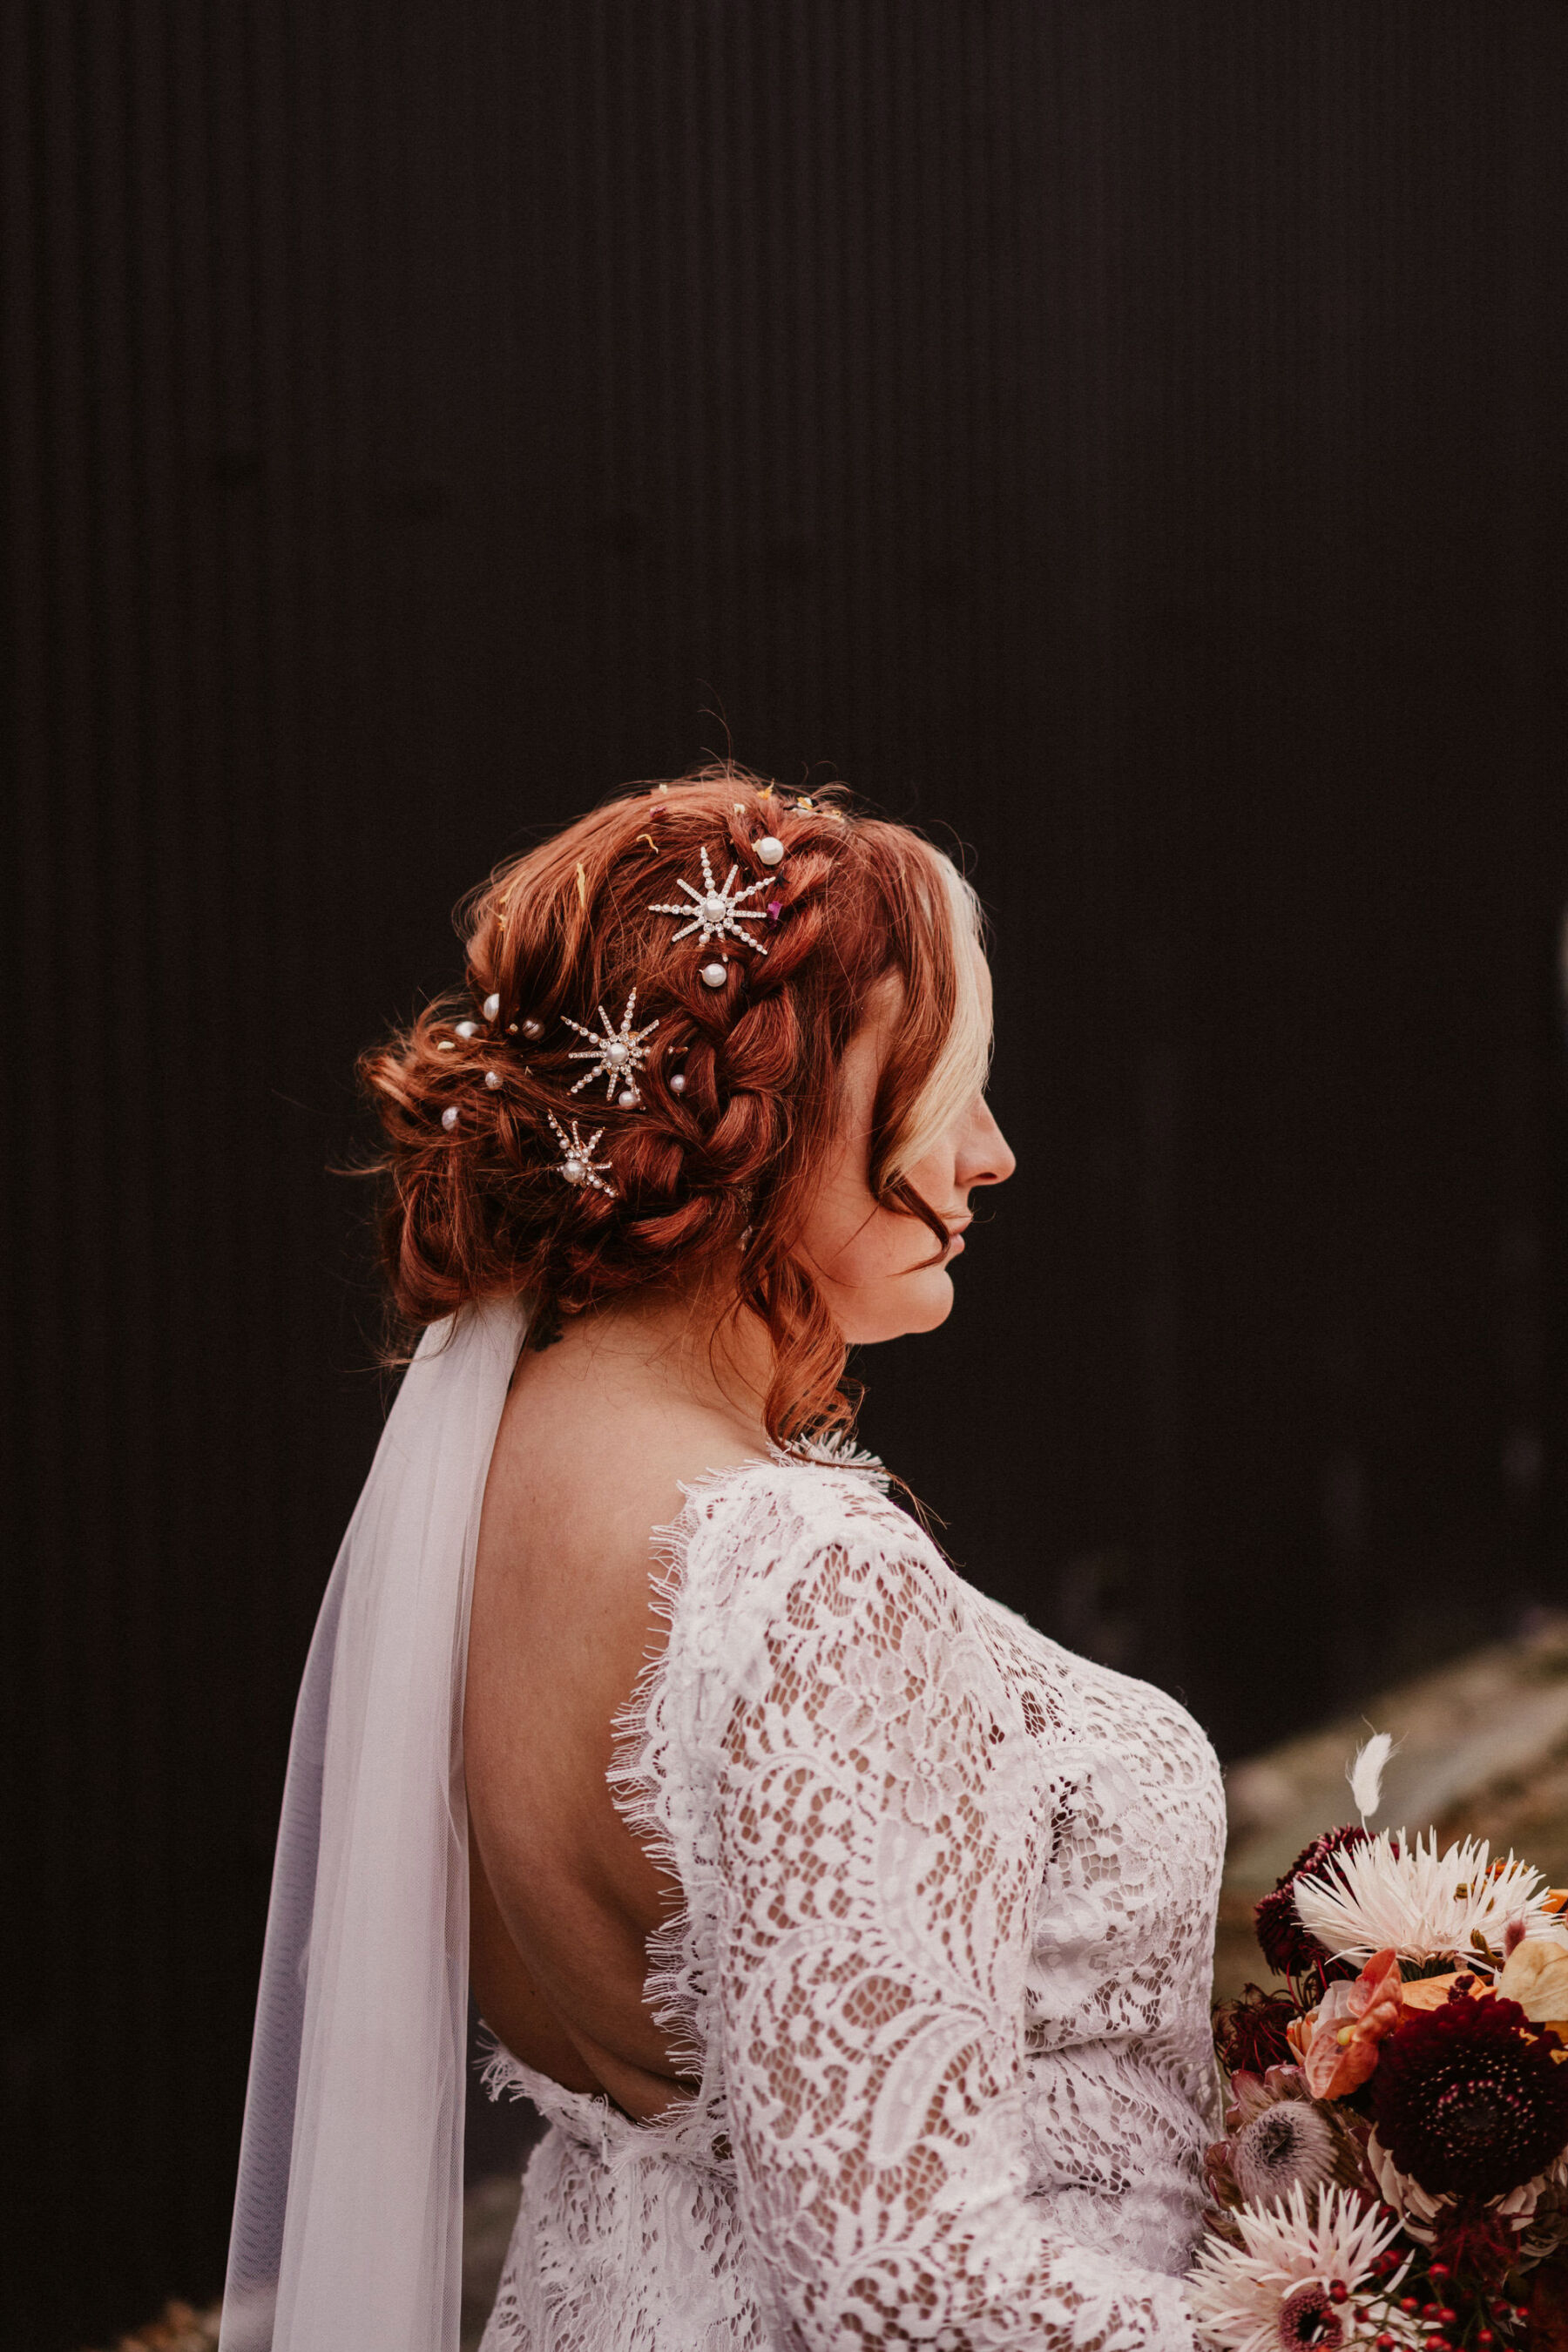 Bride with celestial, star hair clips and pearls in her hair.